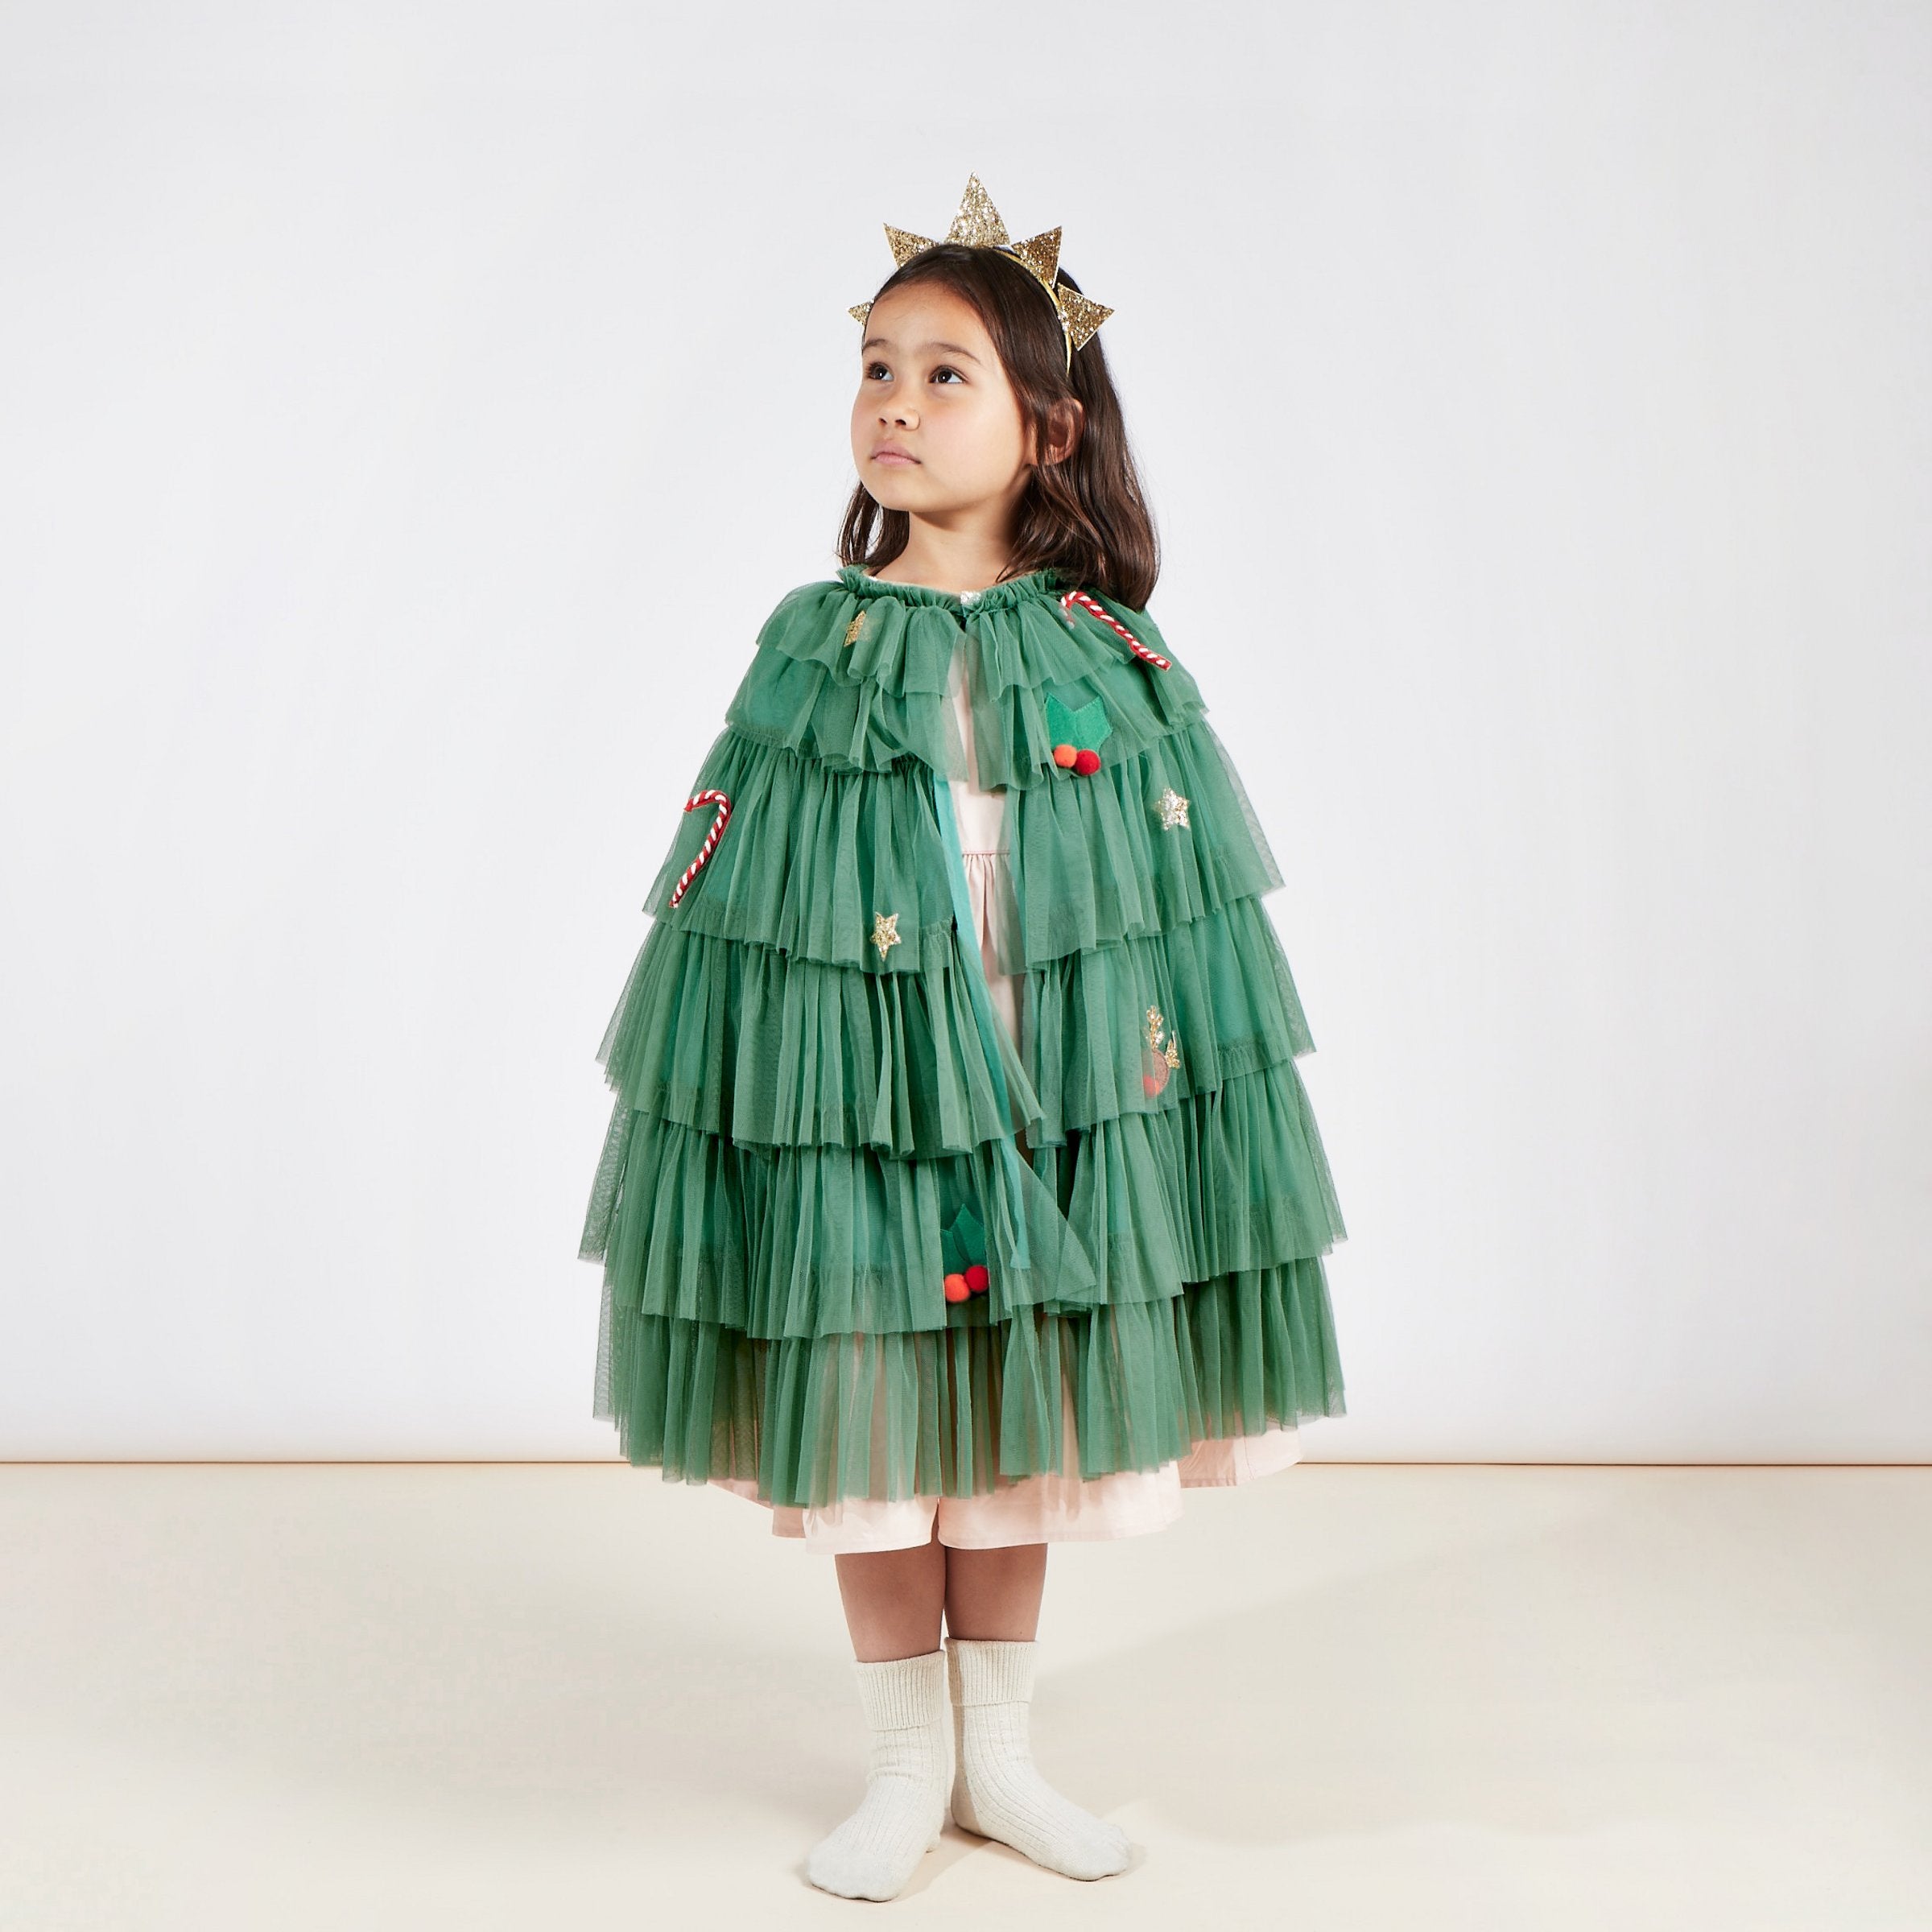 This gorgeous Christmas tree costume is made from tulle with delightful Christmas embellishments